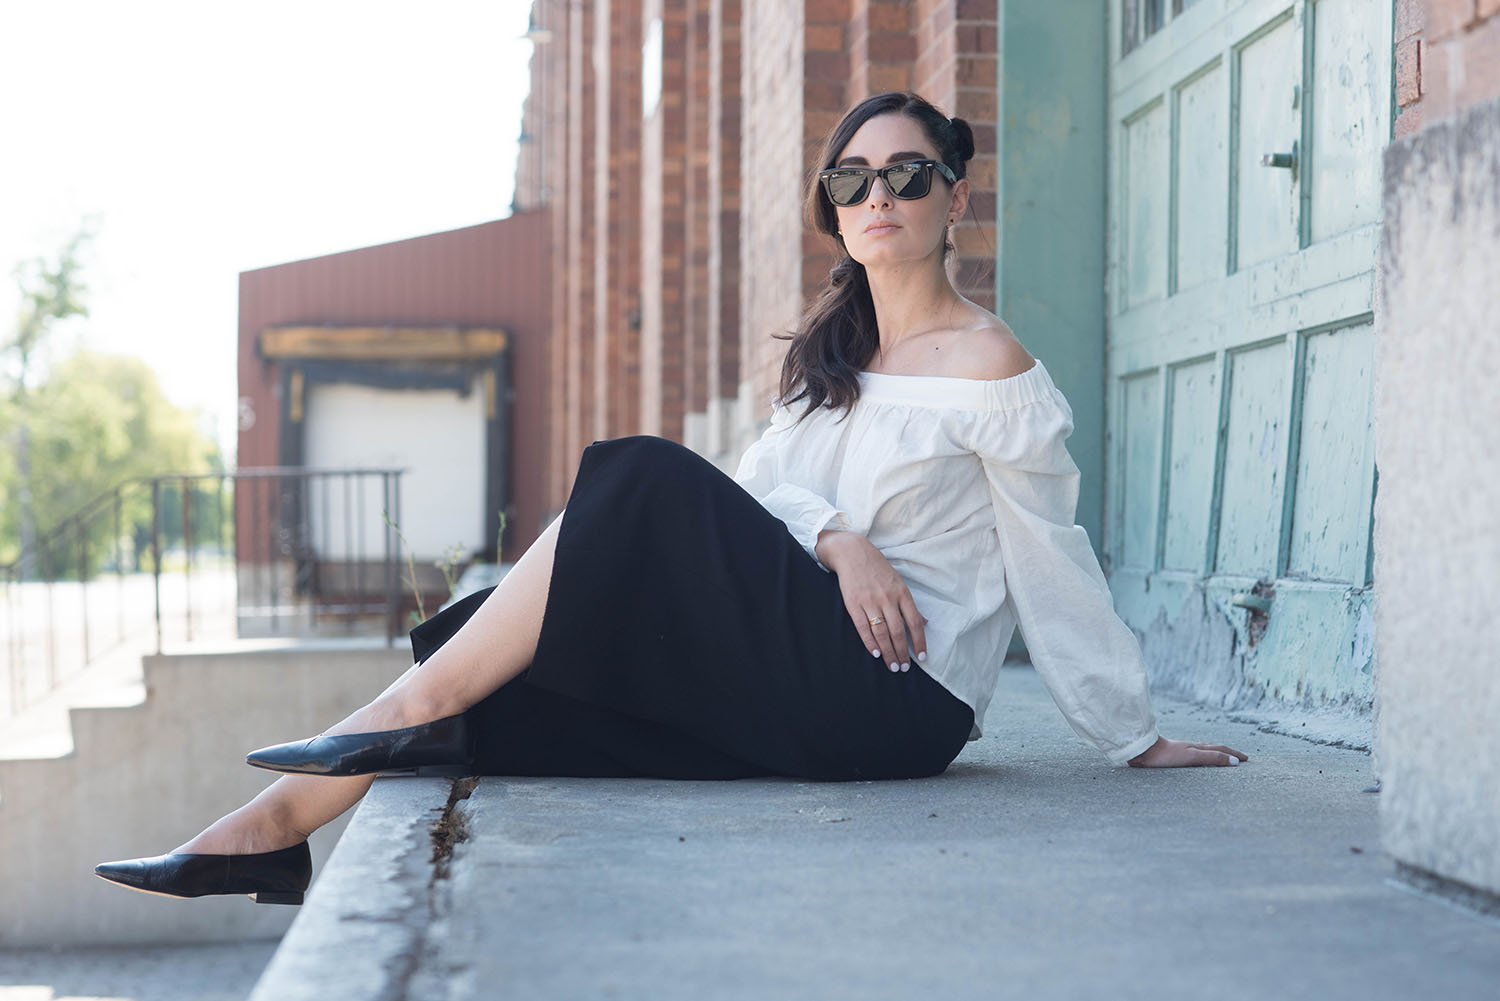 Fashion blogger Cee Fardoe of Coco & Vera sits in an old loading bay wearing a L'Academie off-shoulder blouse, RayBan Wayfarer sunglasses and black Aritzia culottes